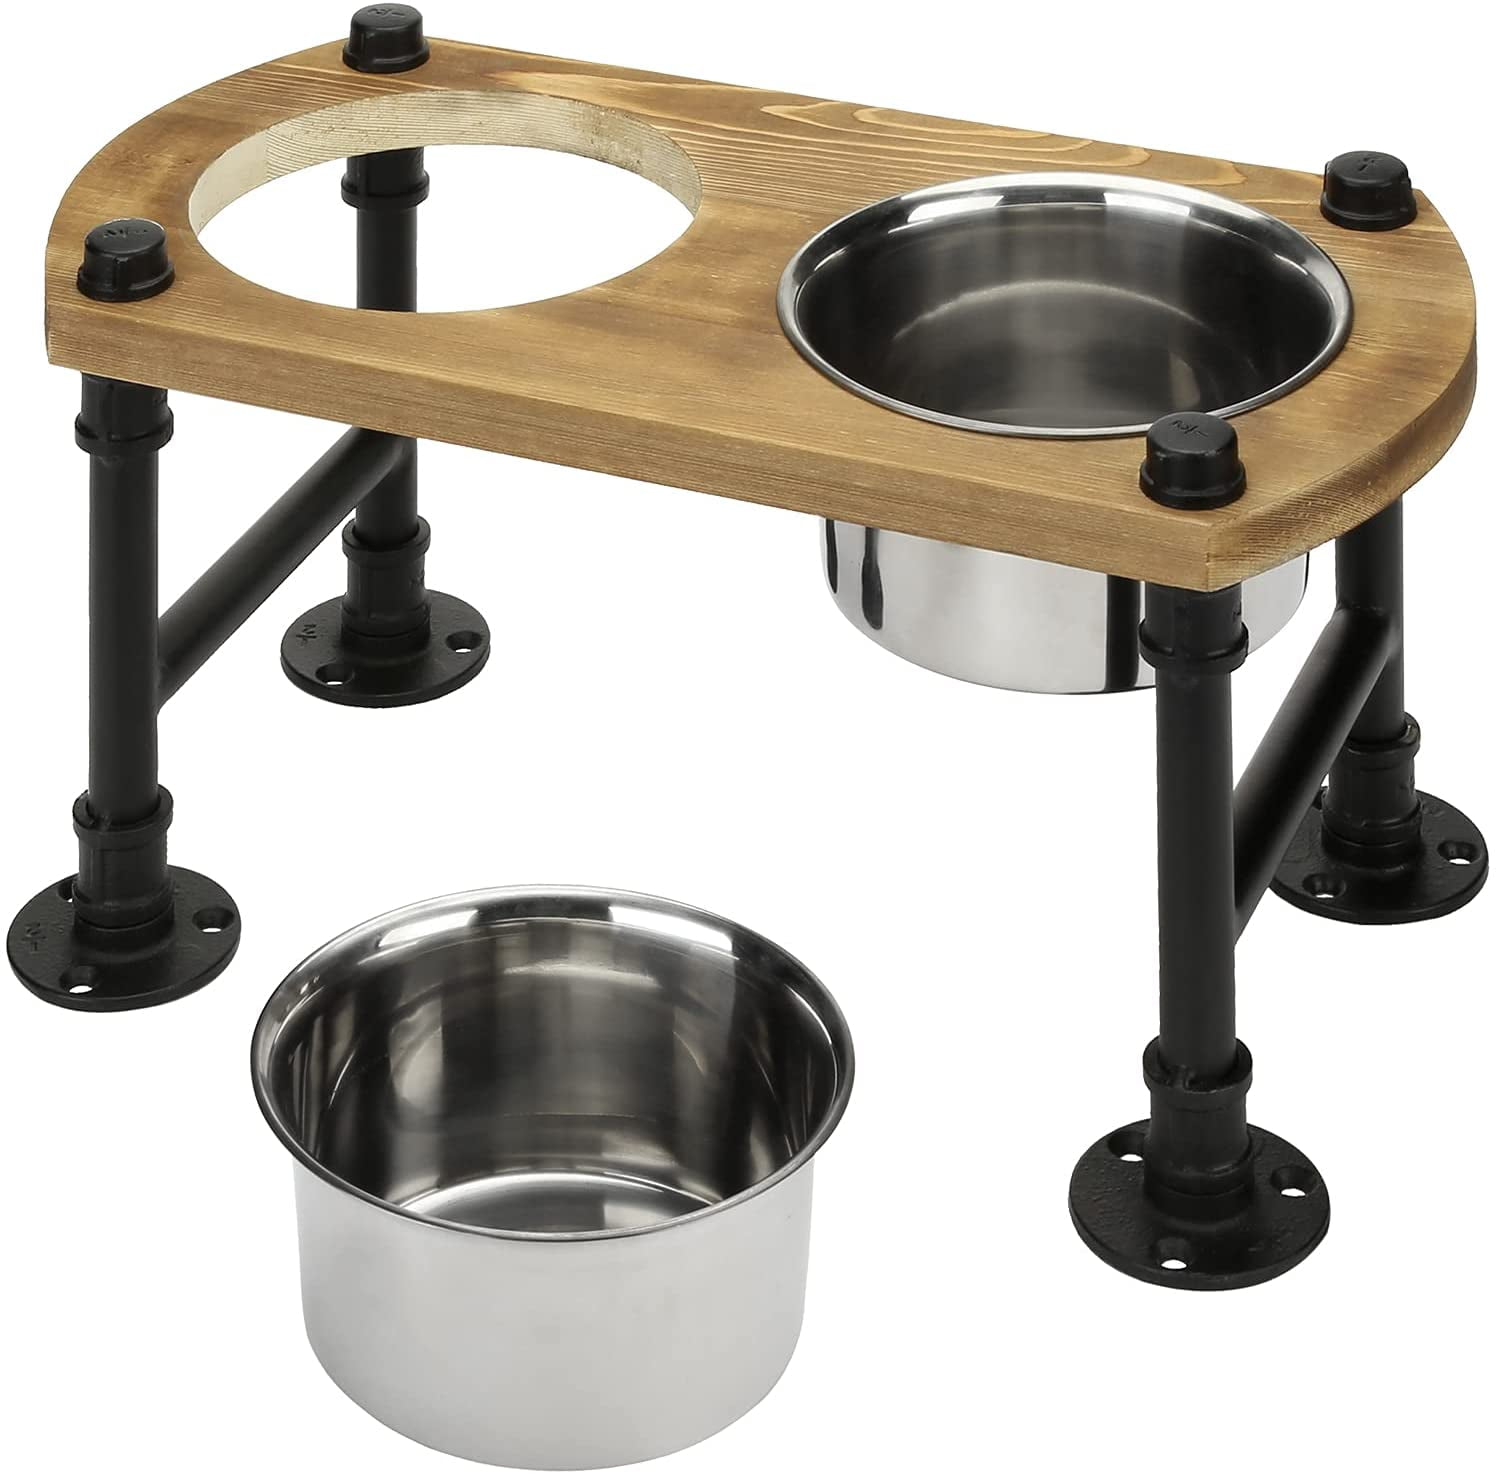 2 Removable Stainless Steel Bowls Industrial Burnt Wood and Black Metal Pipe Raised Pet Feeder